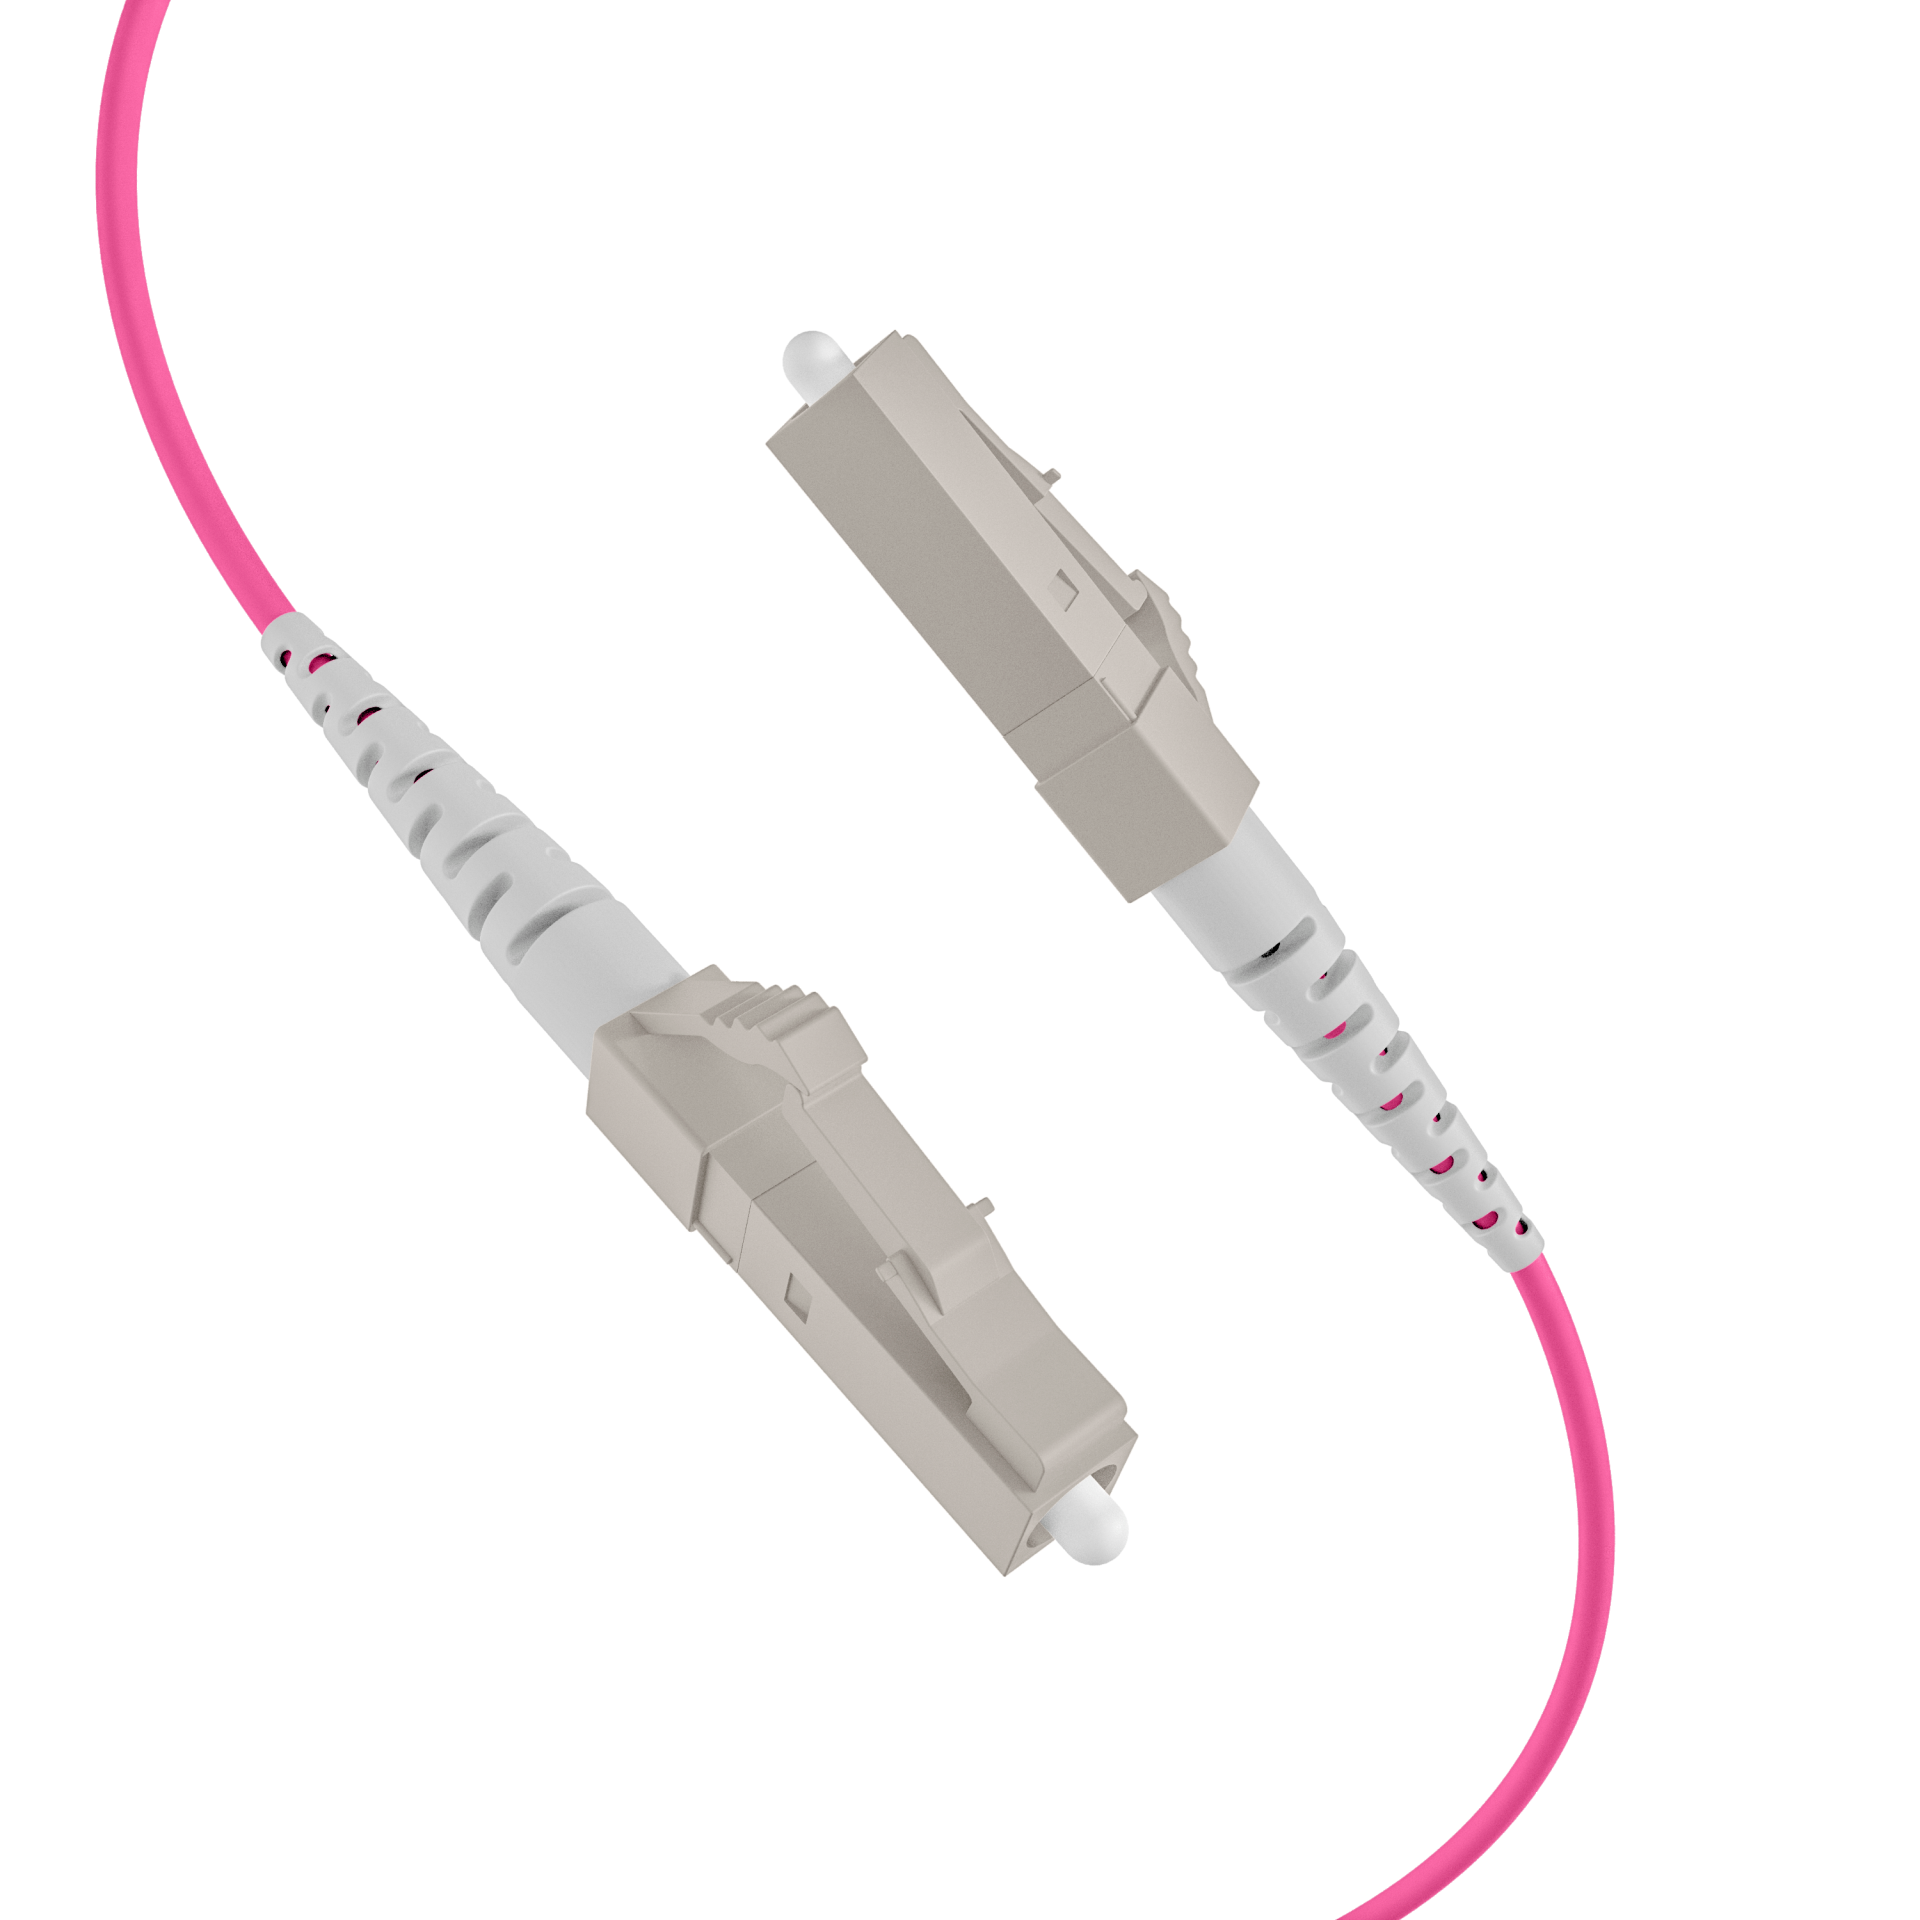 Trunkcable U-DQ(ZN)BH OM4 8G (1x8) LC-LC,160m Dca LSZH